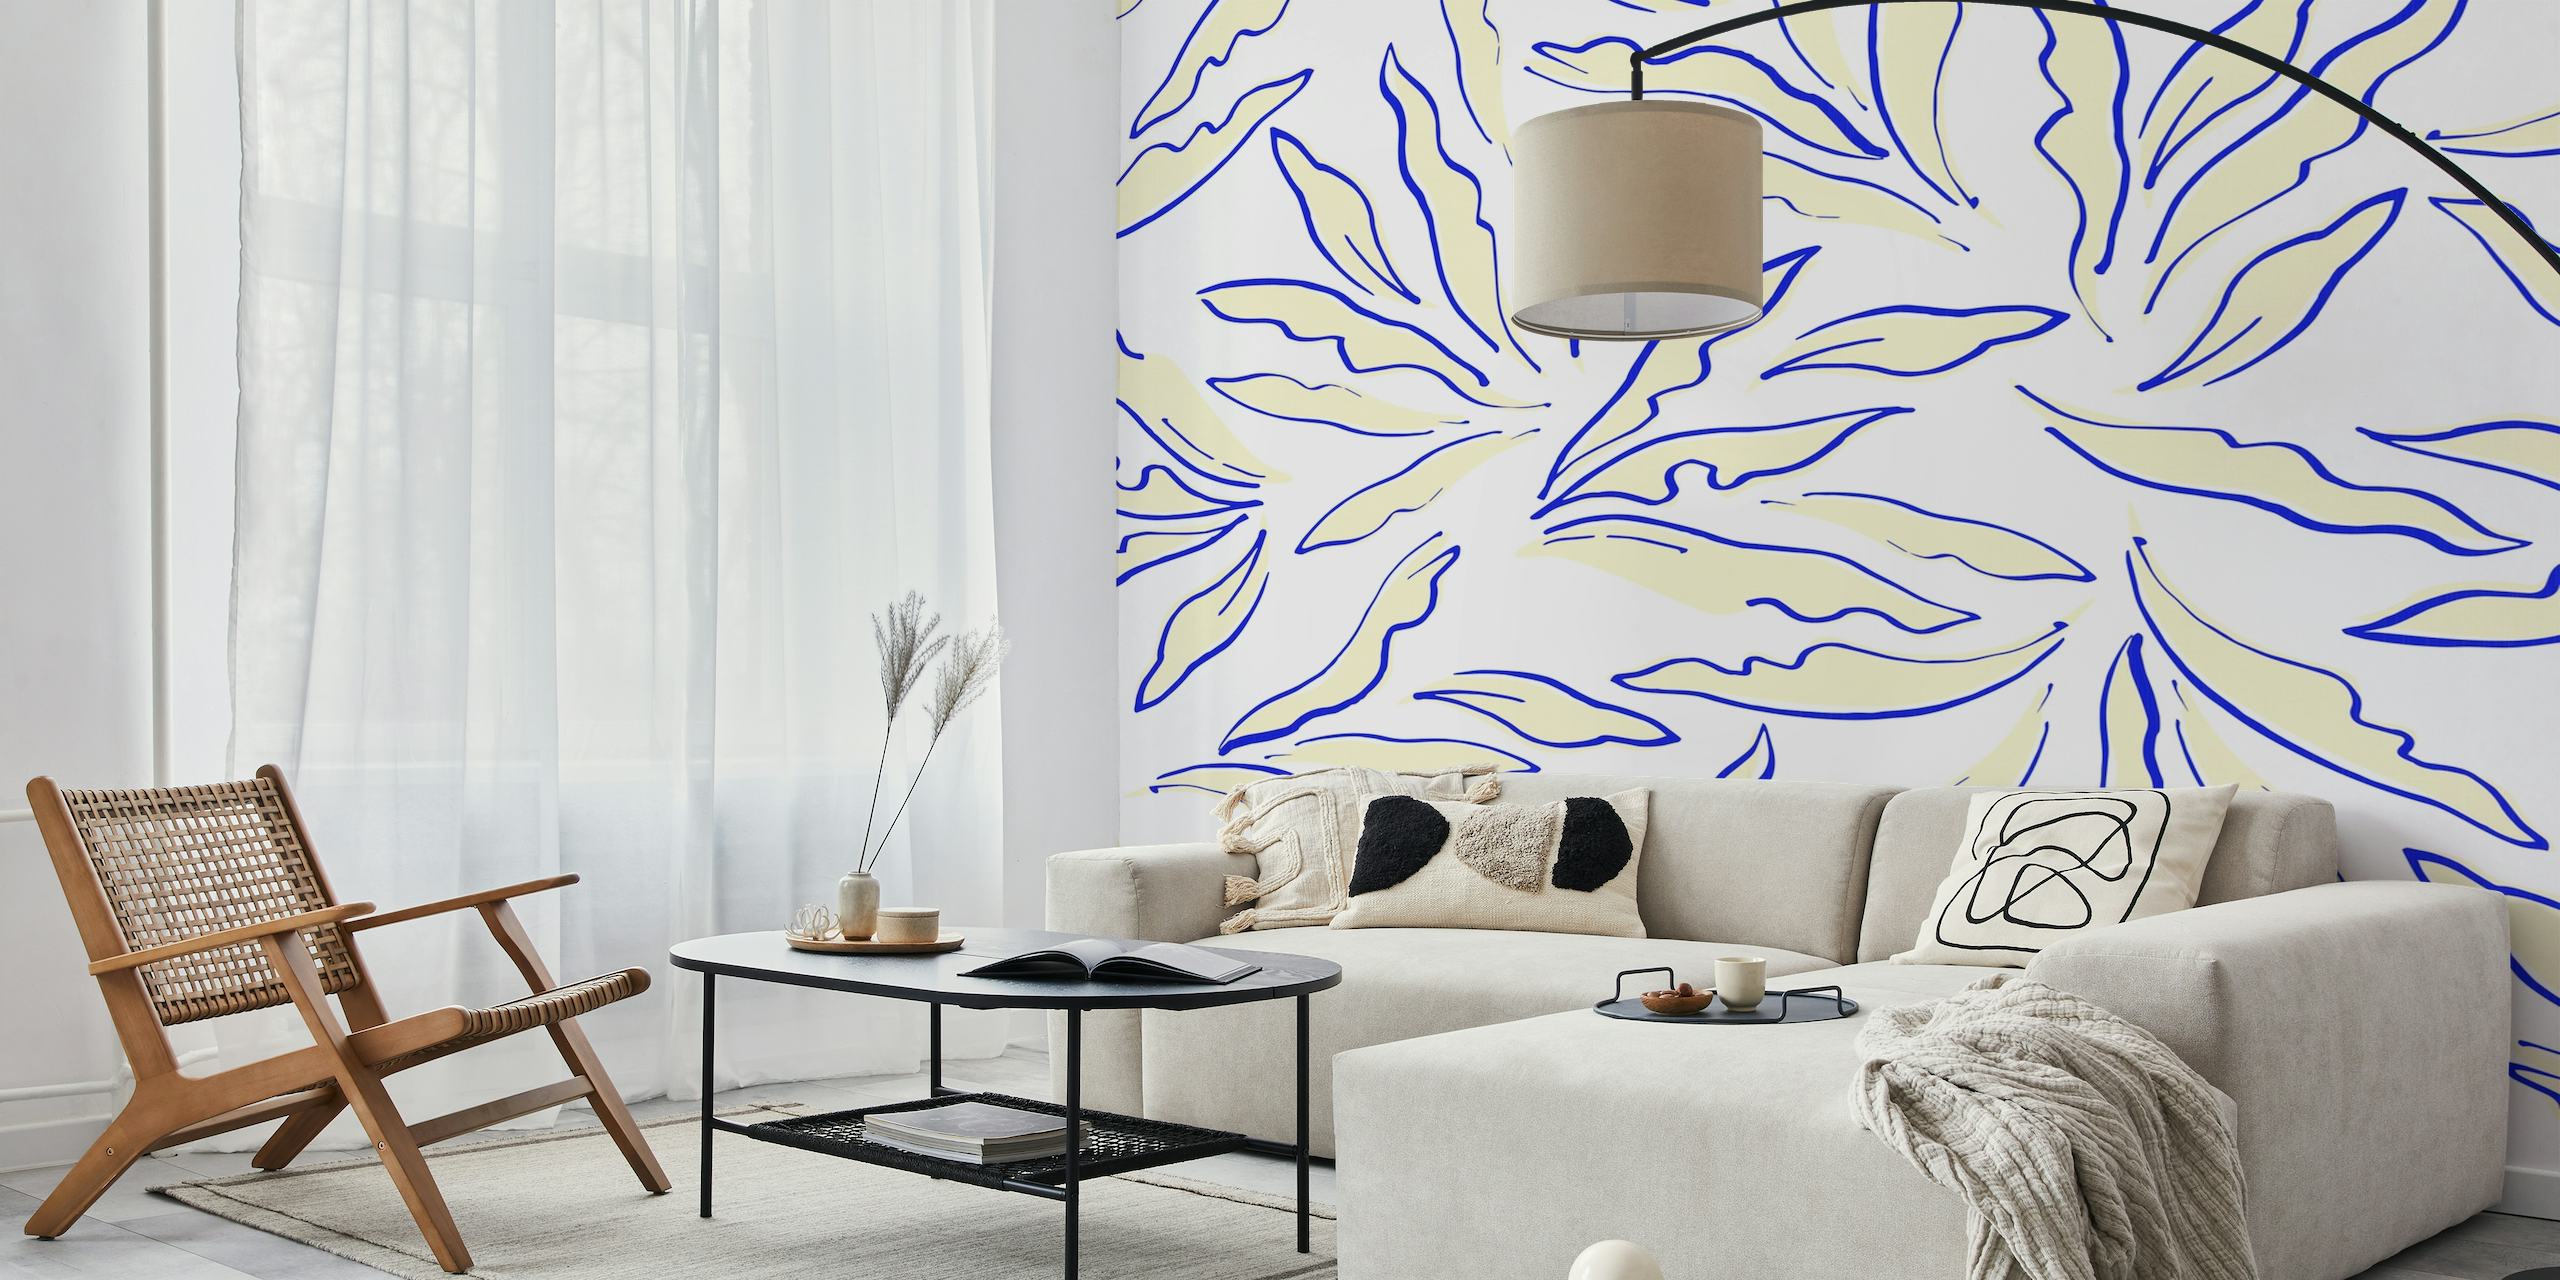 Stylish abstract banana leaf patterns in cream with gold accents on a wall mural